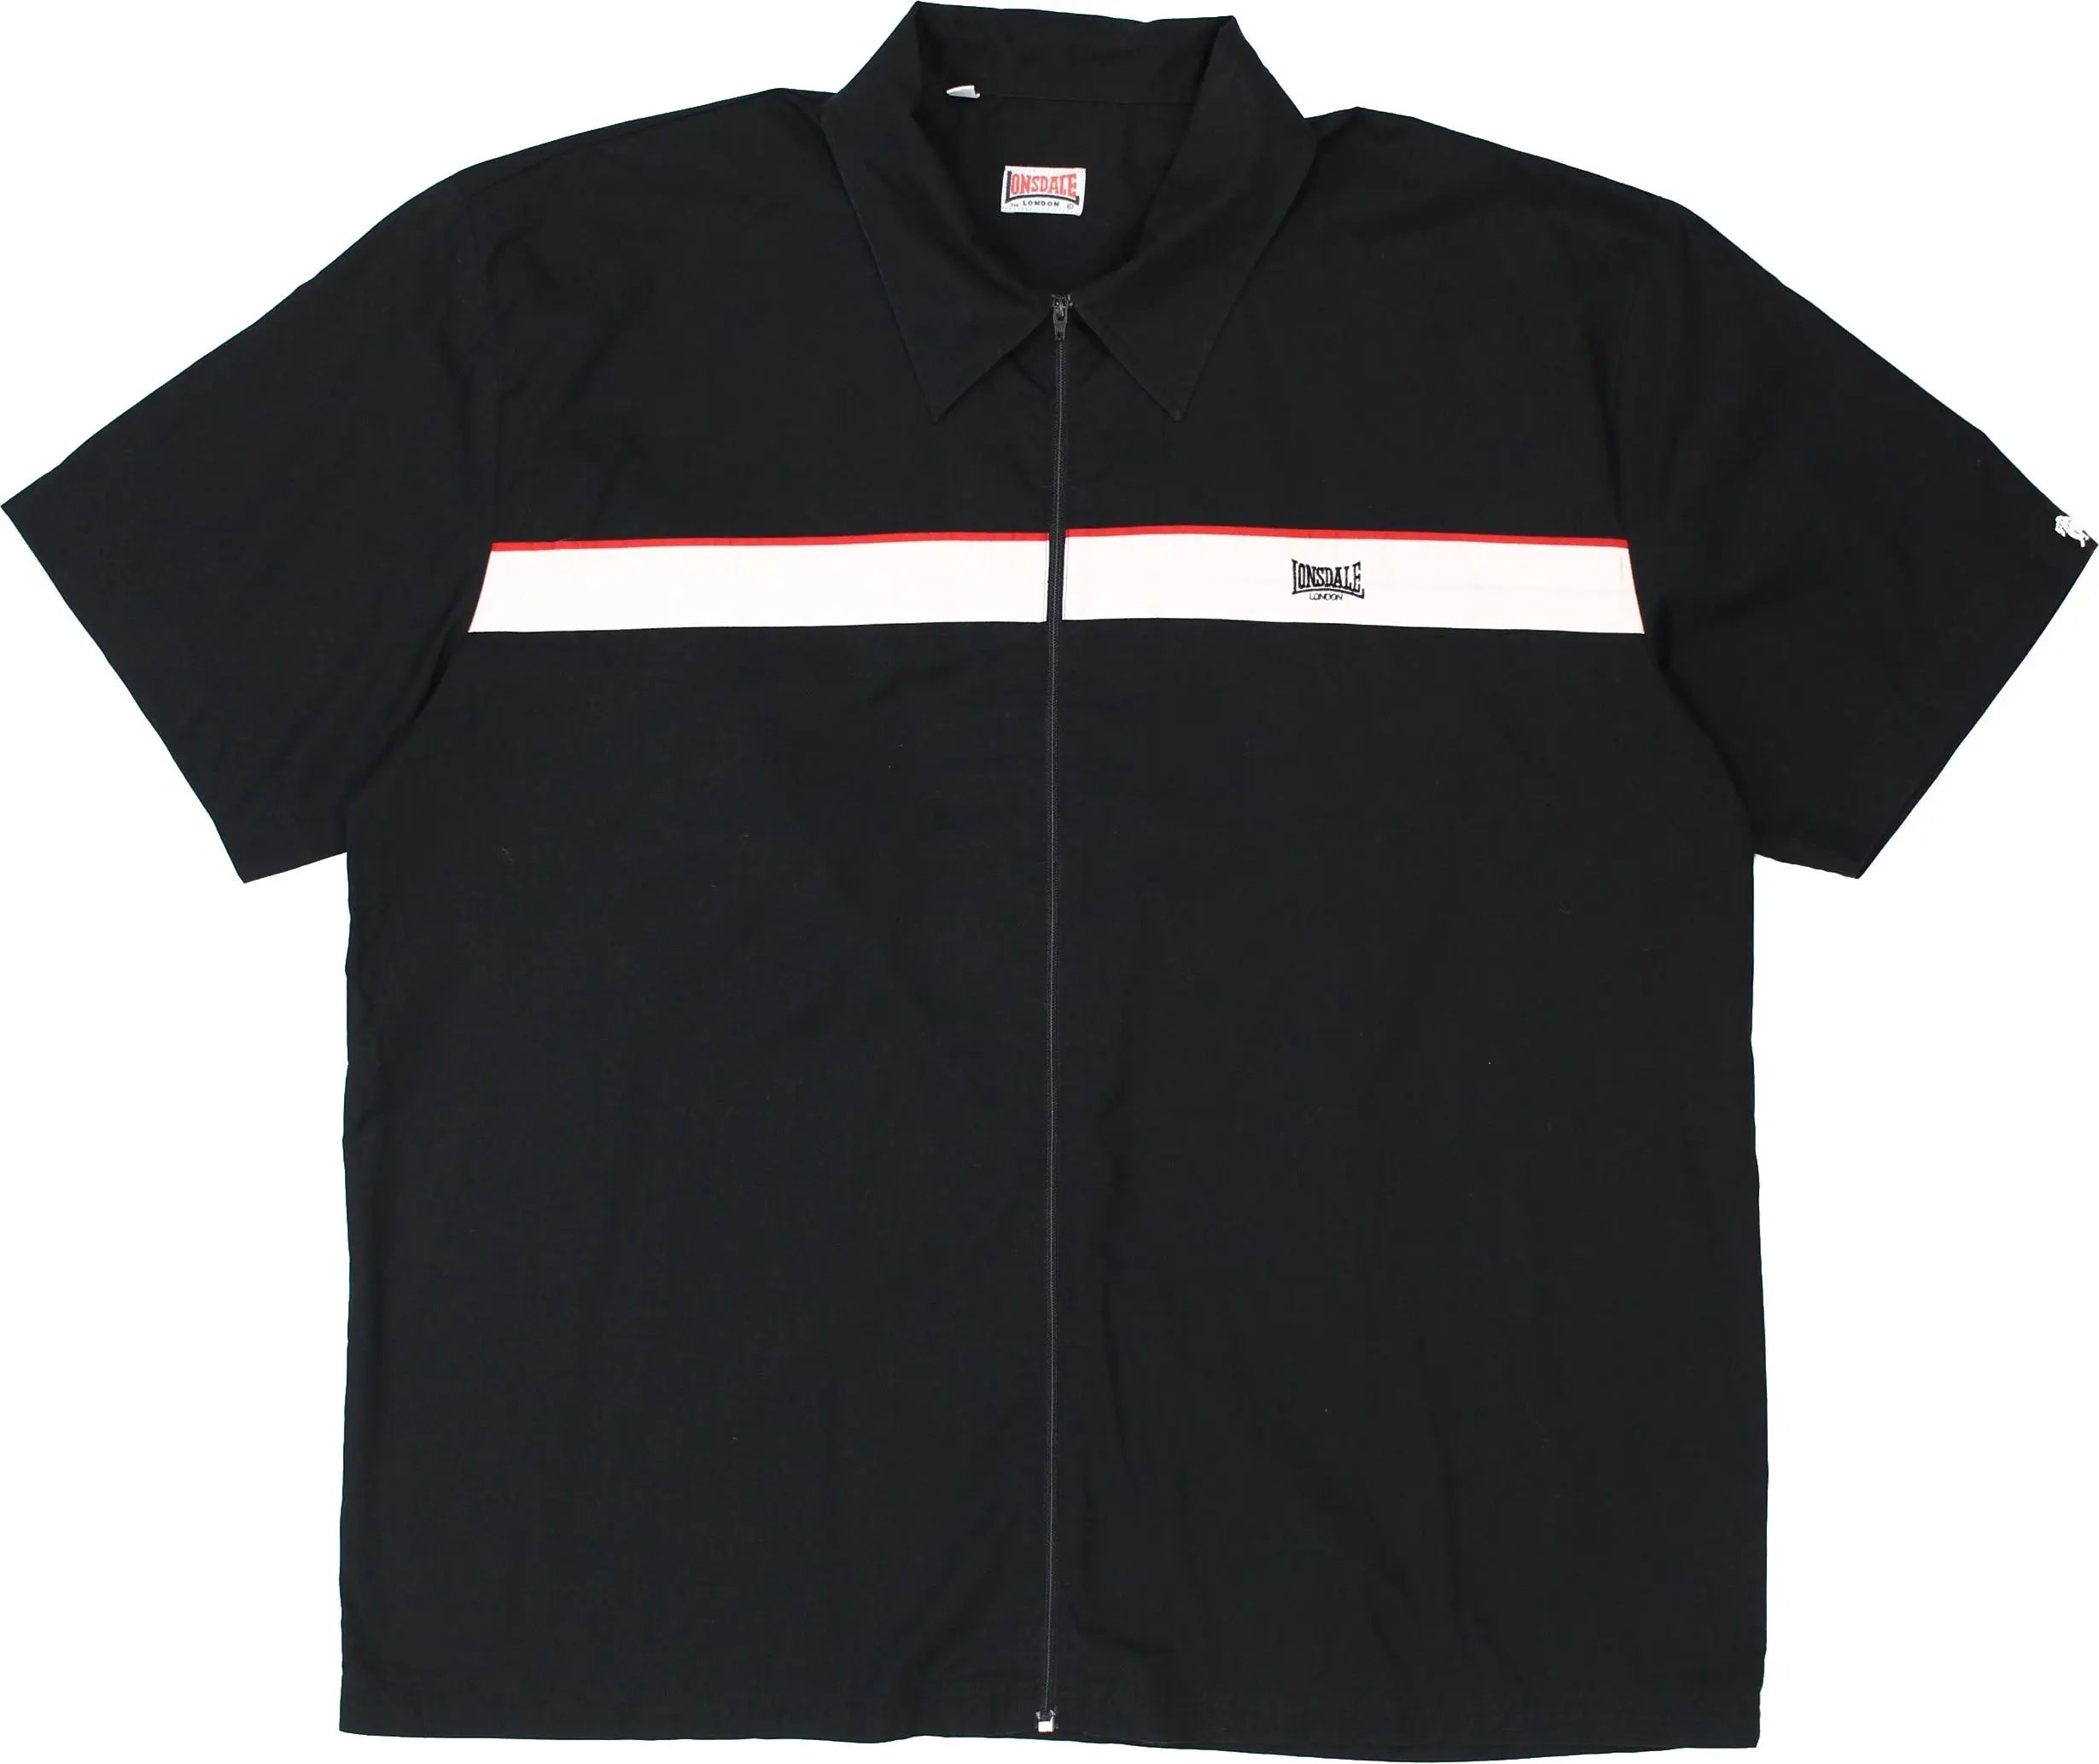 Lonsdale - Black Short Sleeve Zip Up Shirt by Lonsdale- ThriftTale.com - Vintage and second handclothing